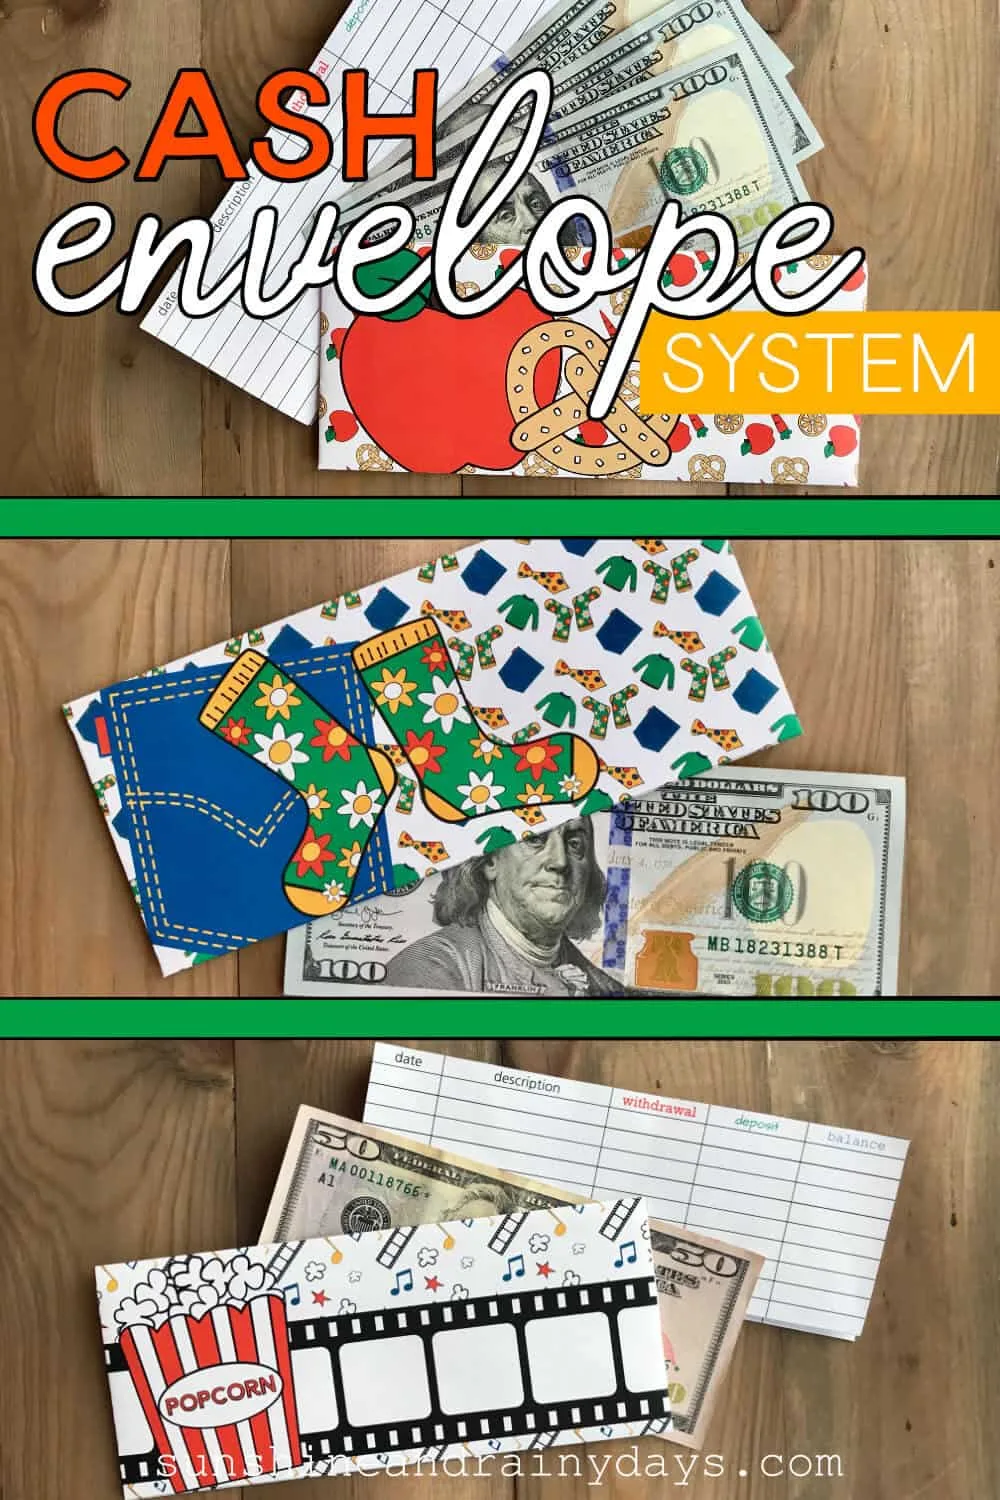 Cash Envelopes with cash and register and the words: Cash Envelope System